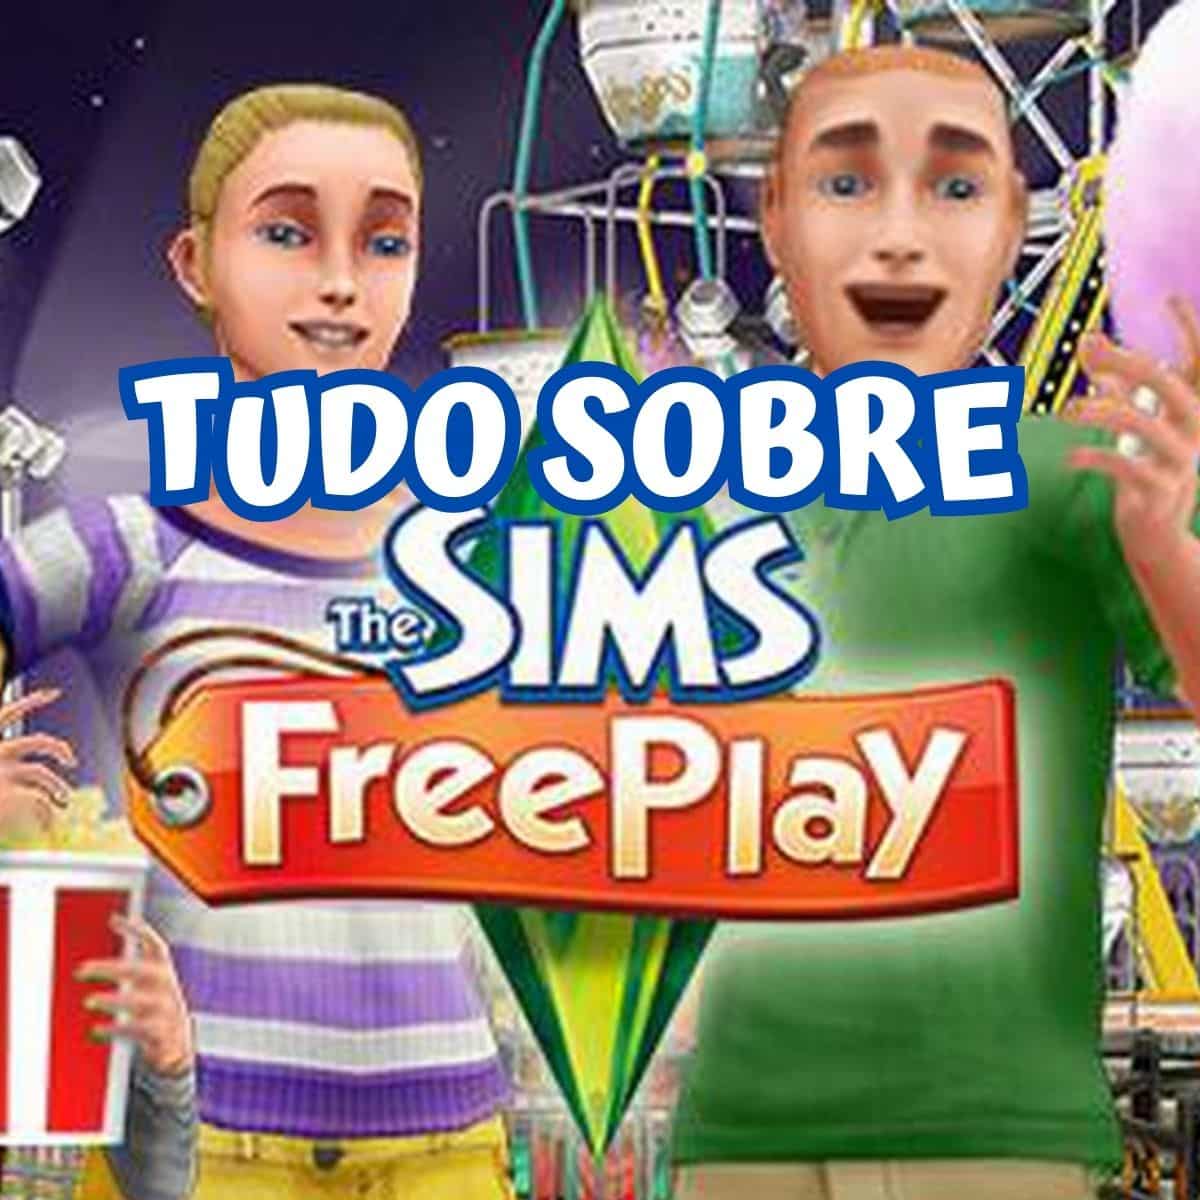 Sims freeplay | android, blackberry 10, ea games, ios, kindle fire, maxis, mobile, multiplayer, pc, singleplayer, the sims freeplay, webos, windows phone | the sims freeplay: jogue the sims onde e quando quiser | 81615947 capa | análises